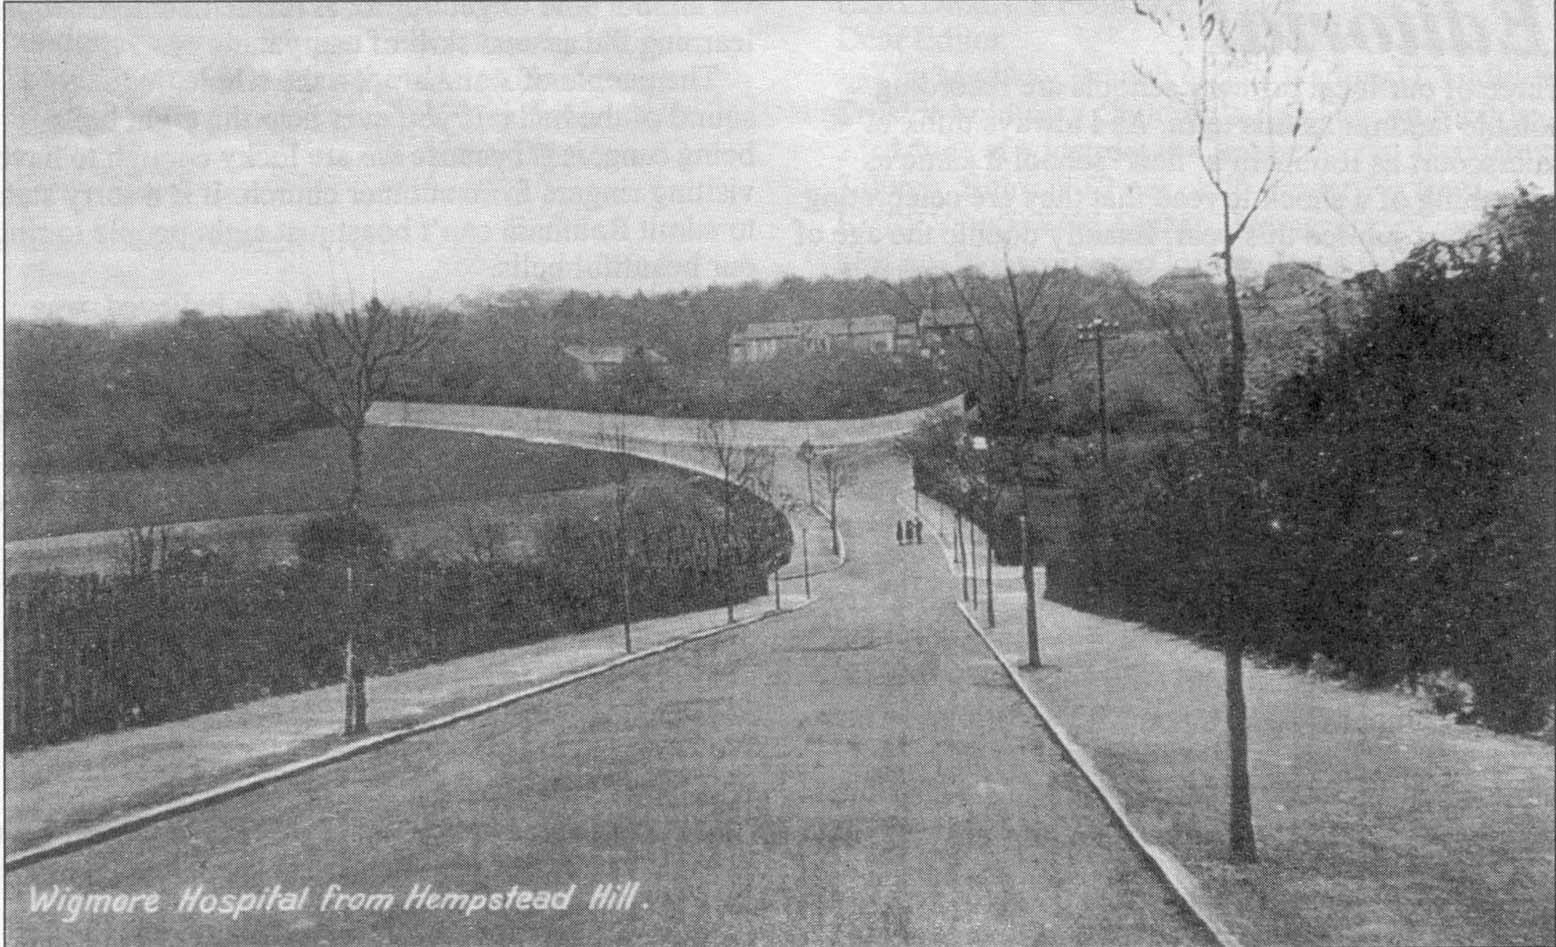  Pictures of historic hempstead kent, old photo of hempstead hill and wigmore hospital